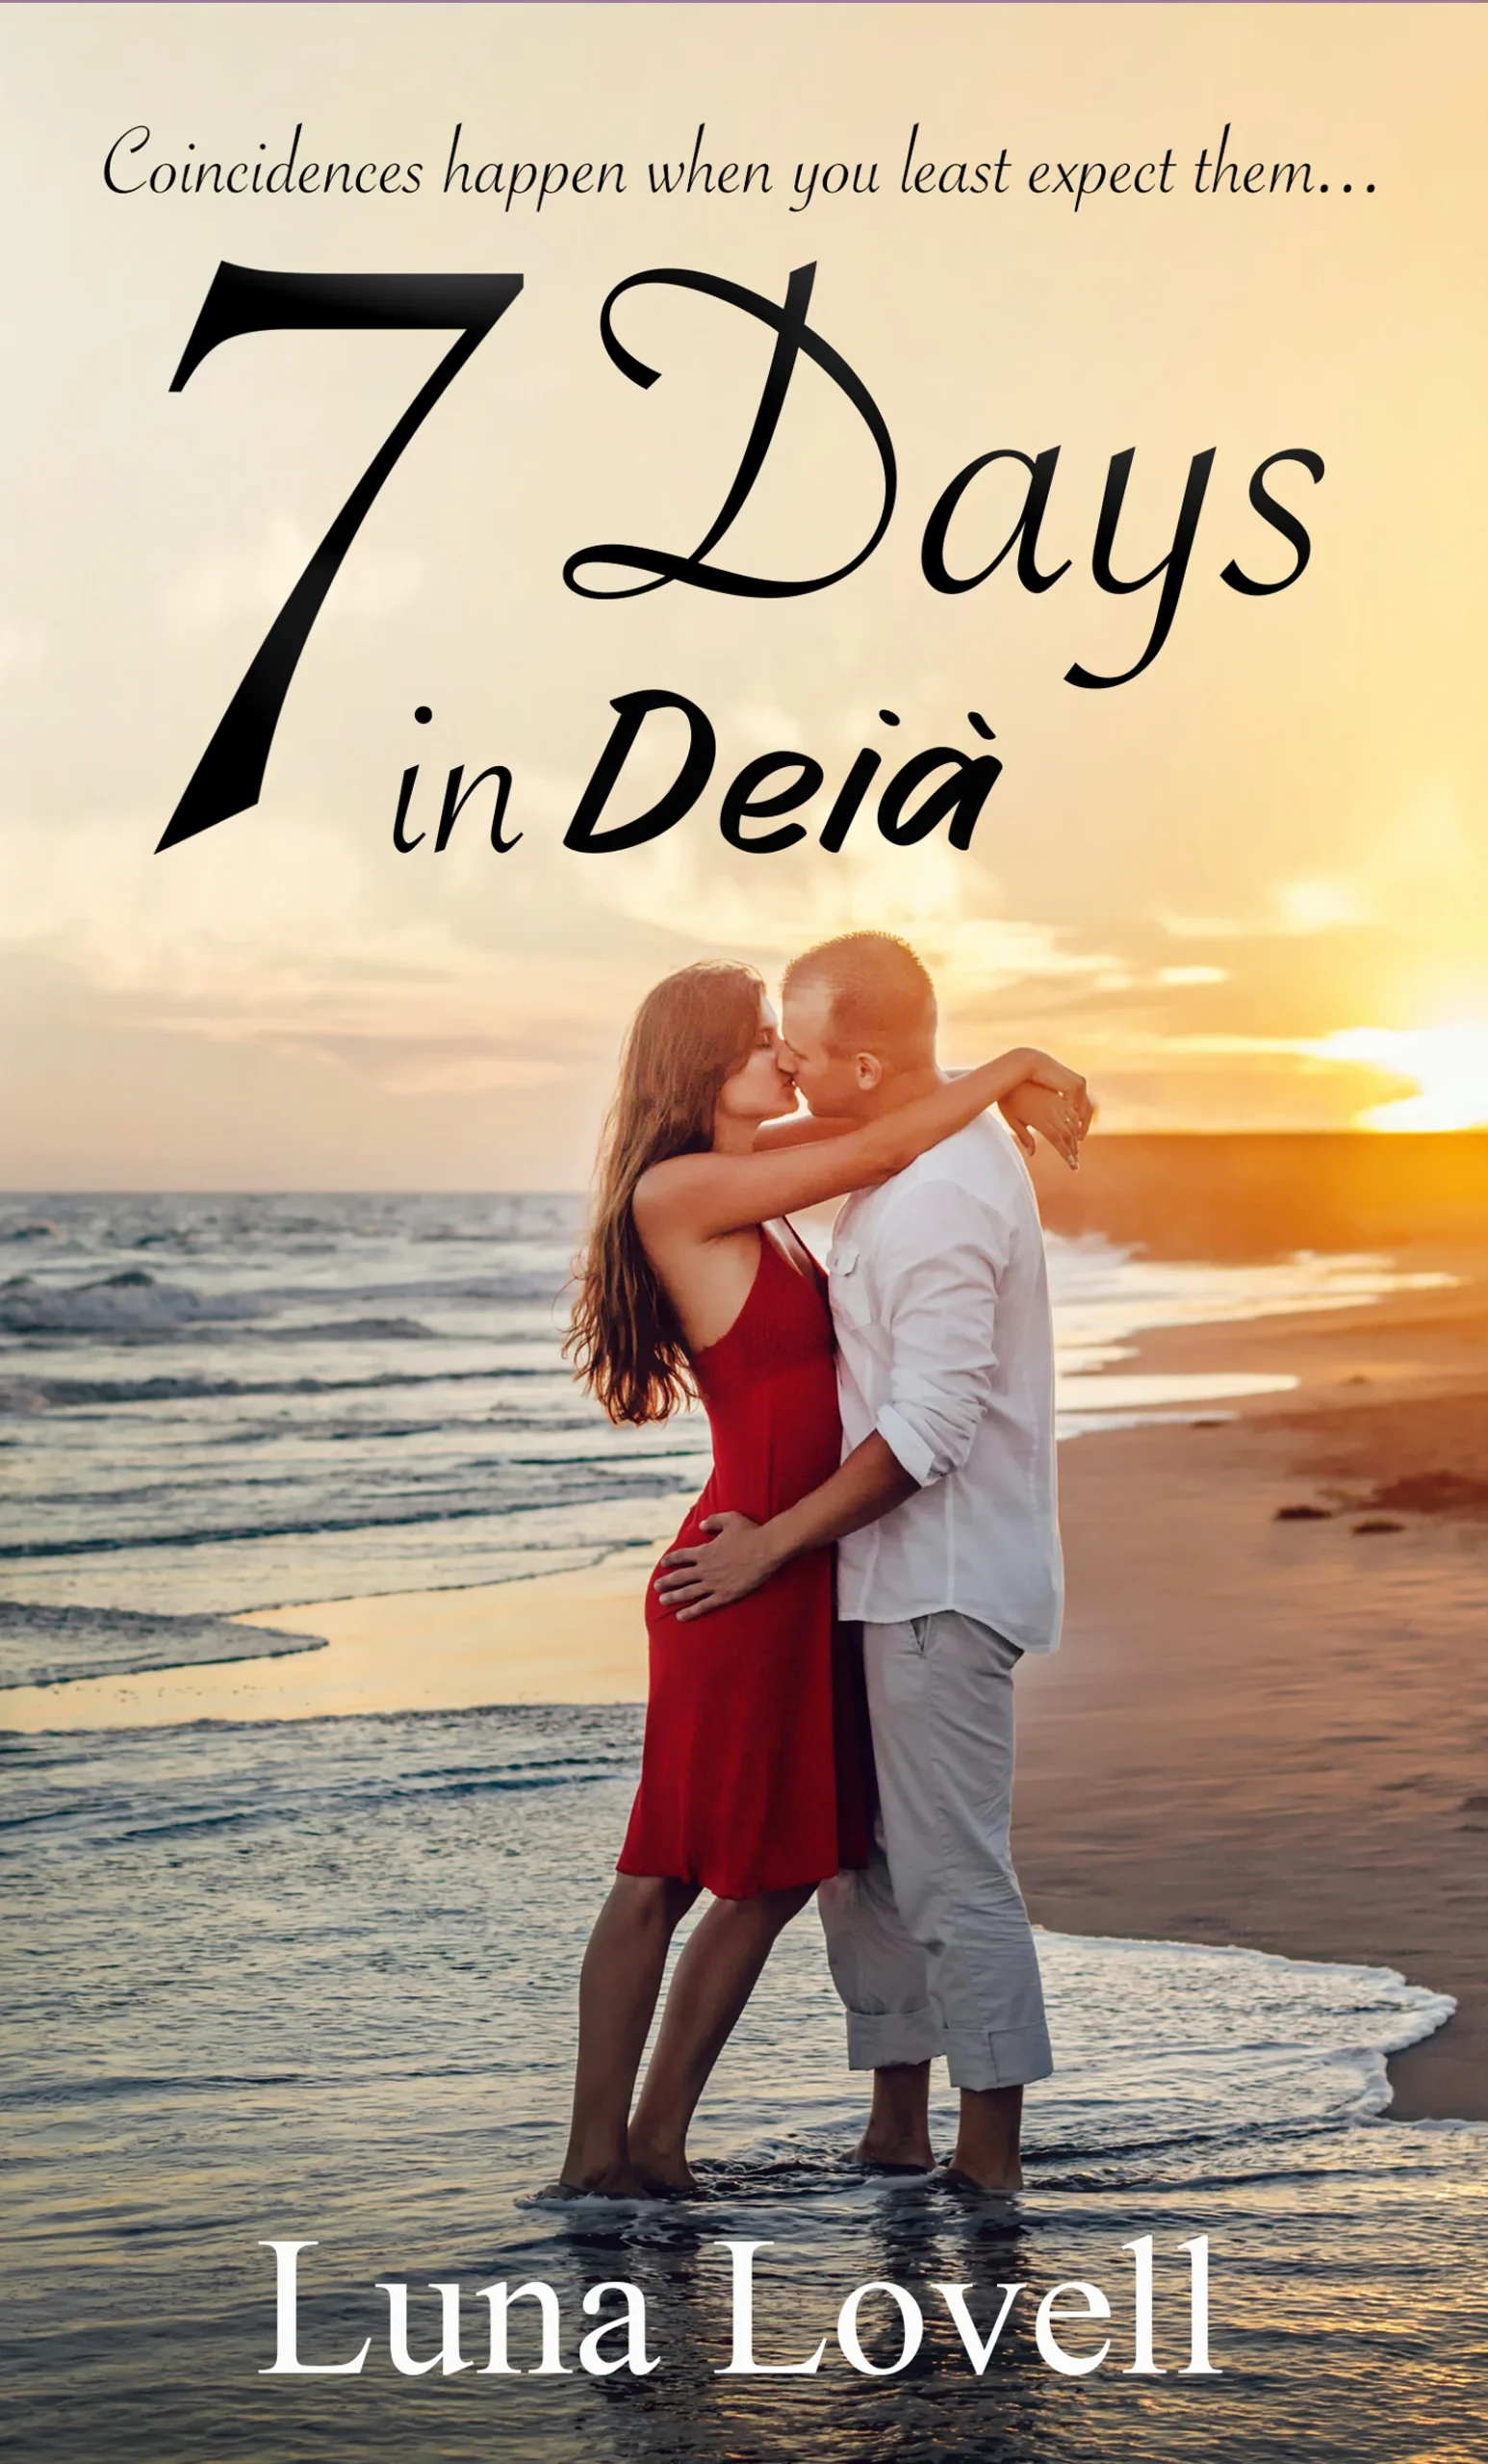 7 Days in Deià – Coincidences happen when you least expect them